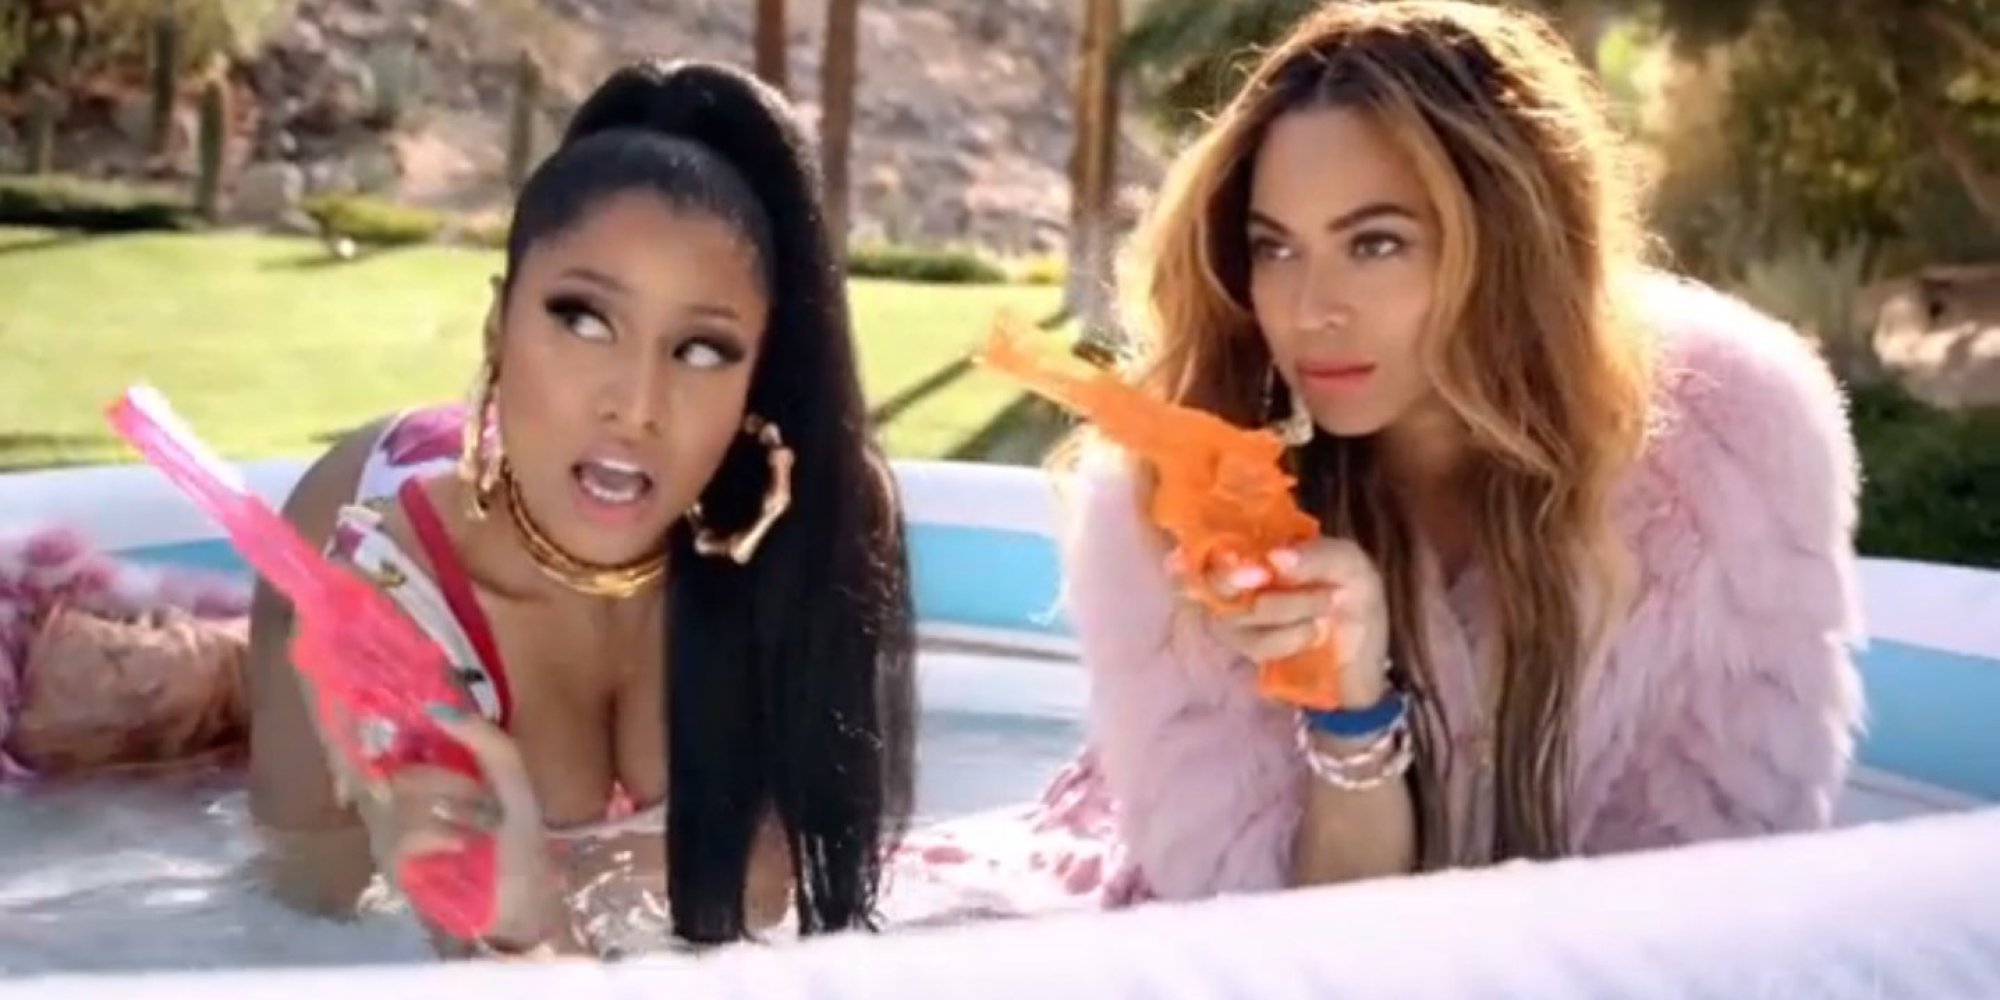 Nicki Minaj And Beyoncé Have An Awesome Summer Party In Feeling Myself